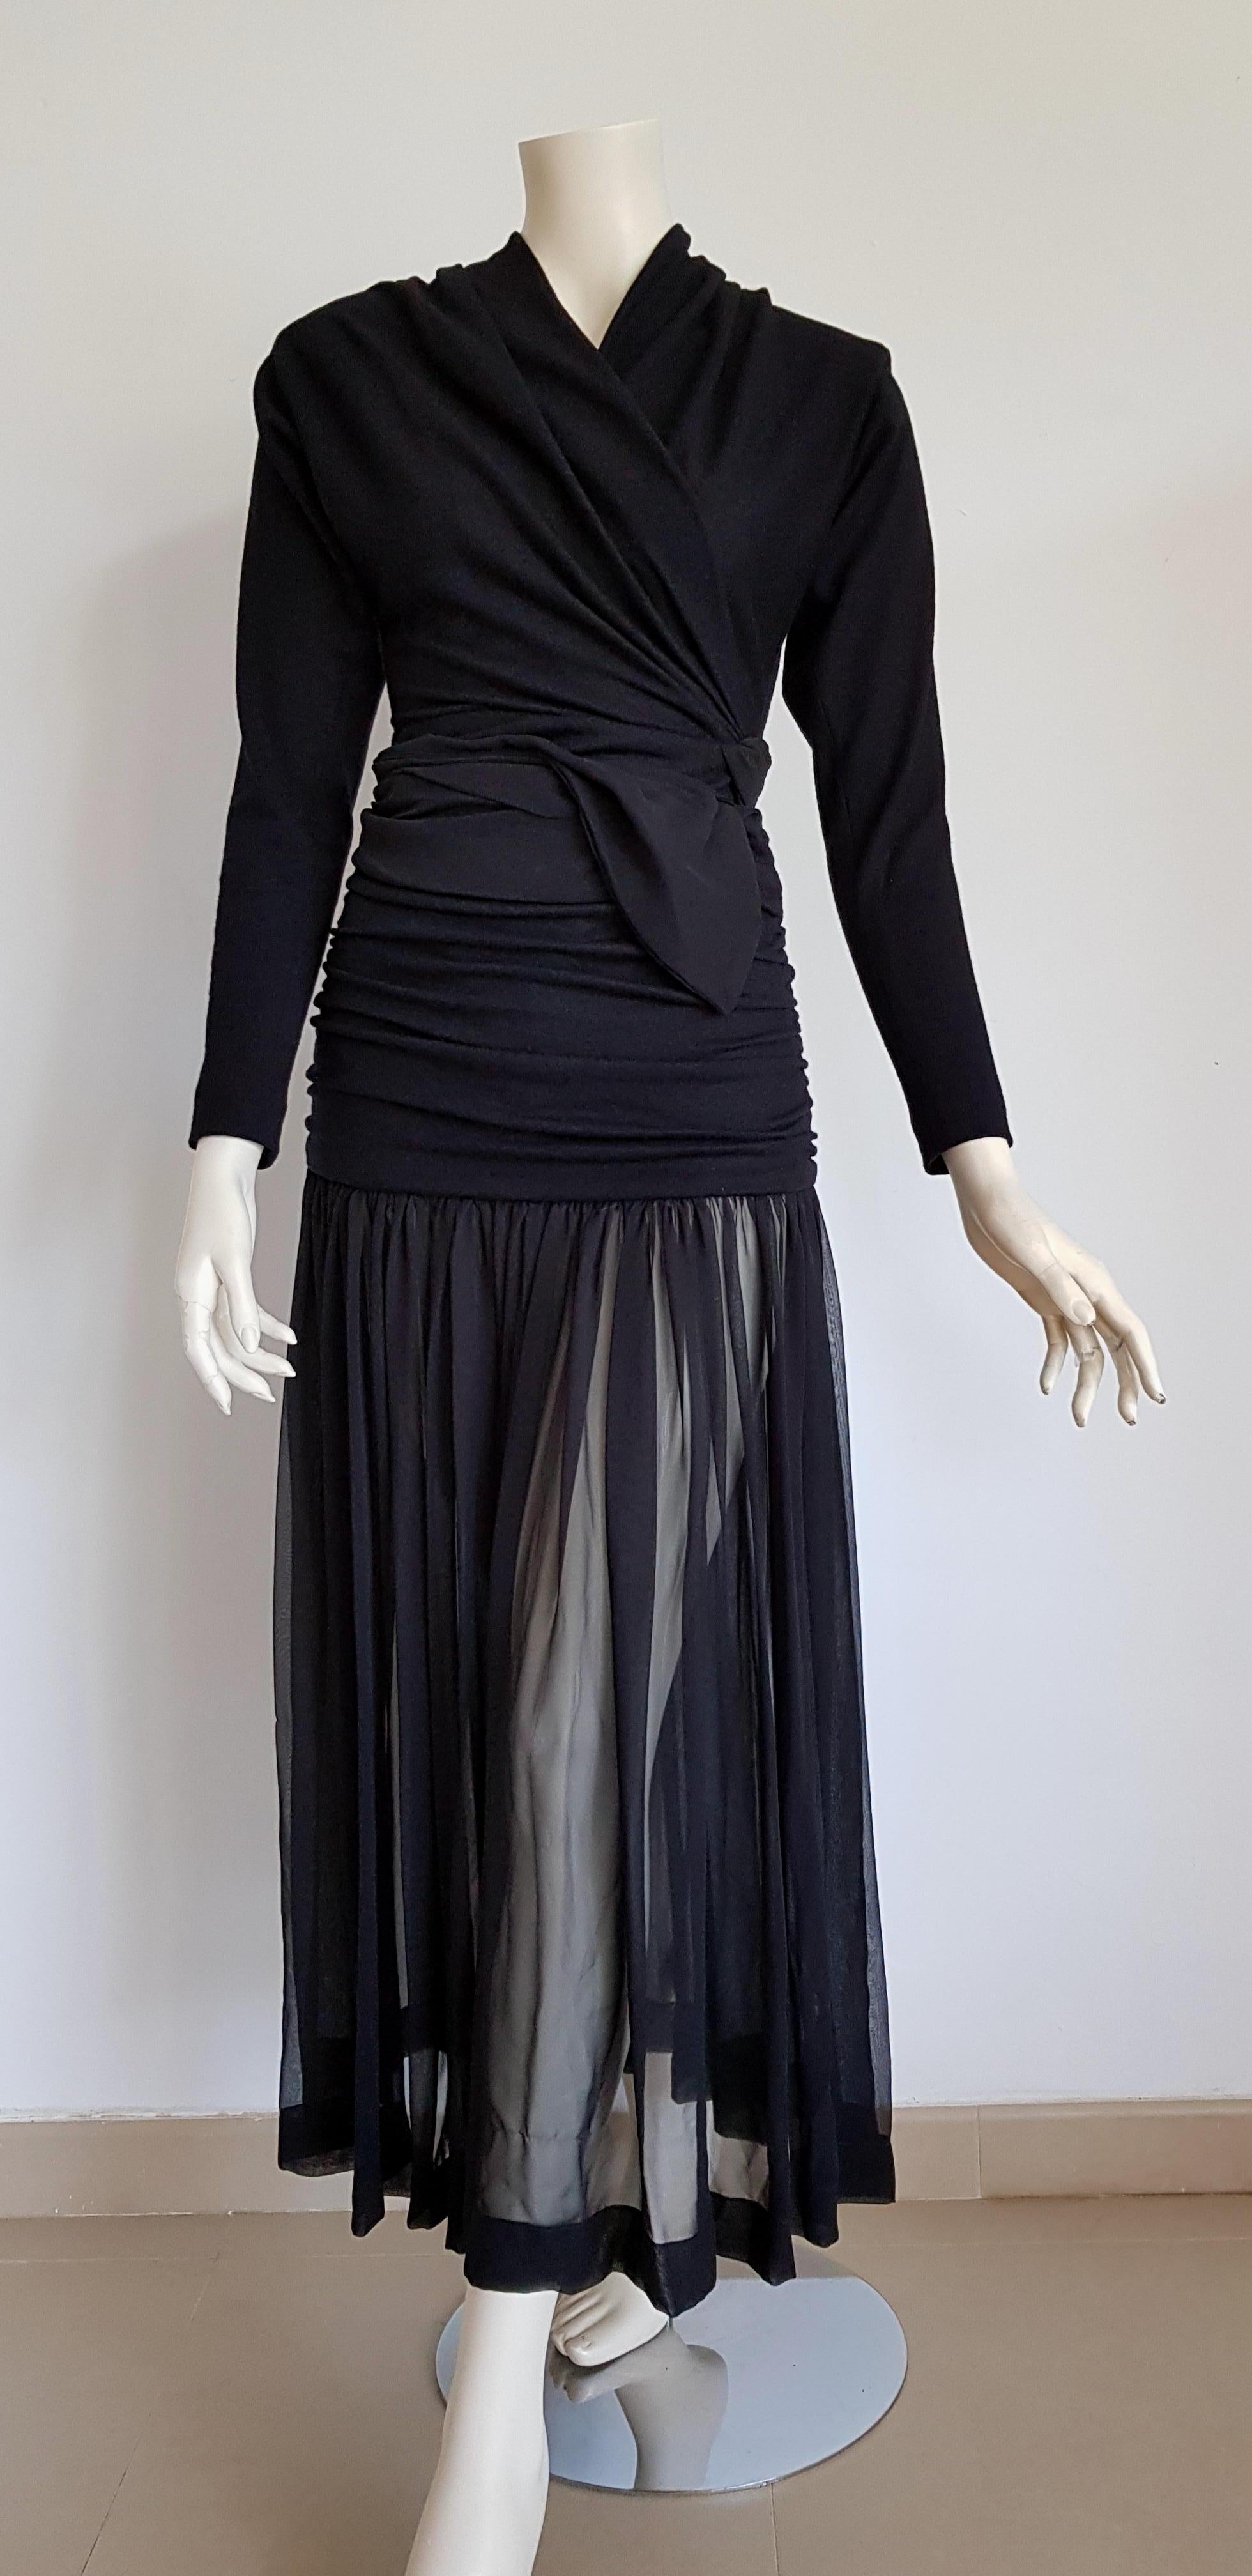 Isabelle ALLARD Paris, High wool waistband, Chiffon skirt, Body with sleeves, Black ensemble dress - Unworn, New.
Isabelle ALLARD is a fashion designer that created only haute couture and selling to international customers too. It did not produce